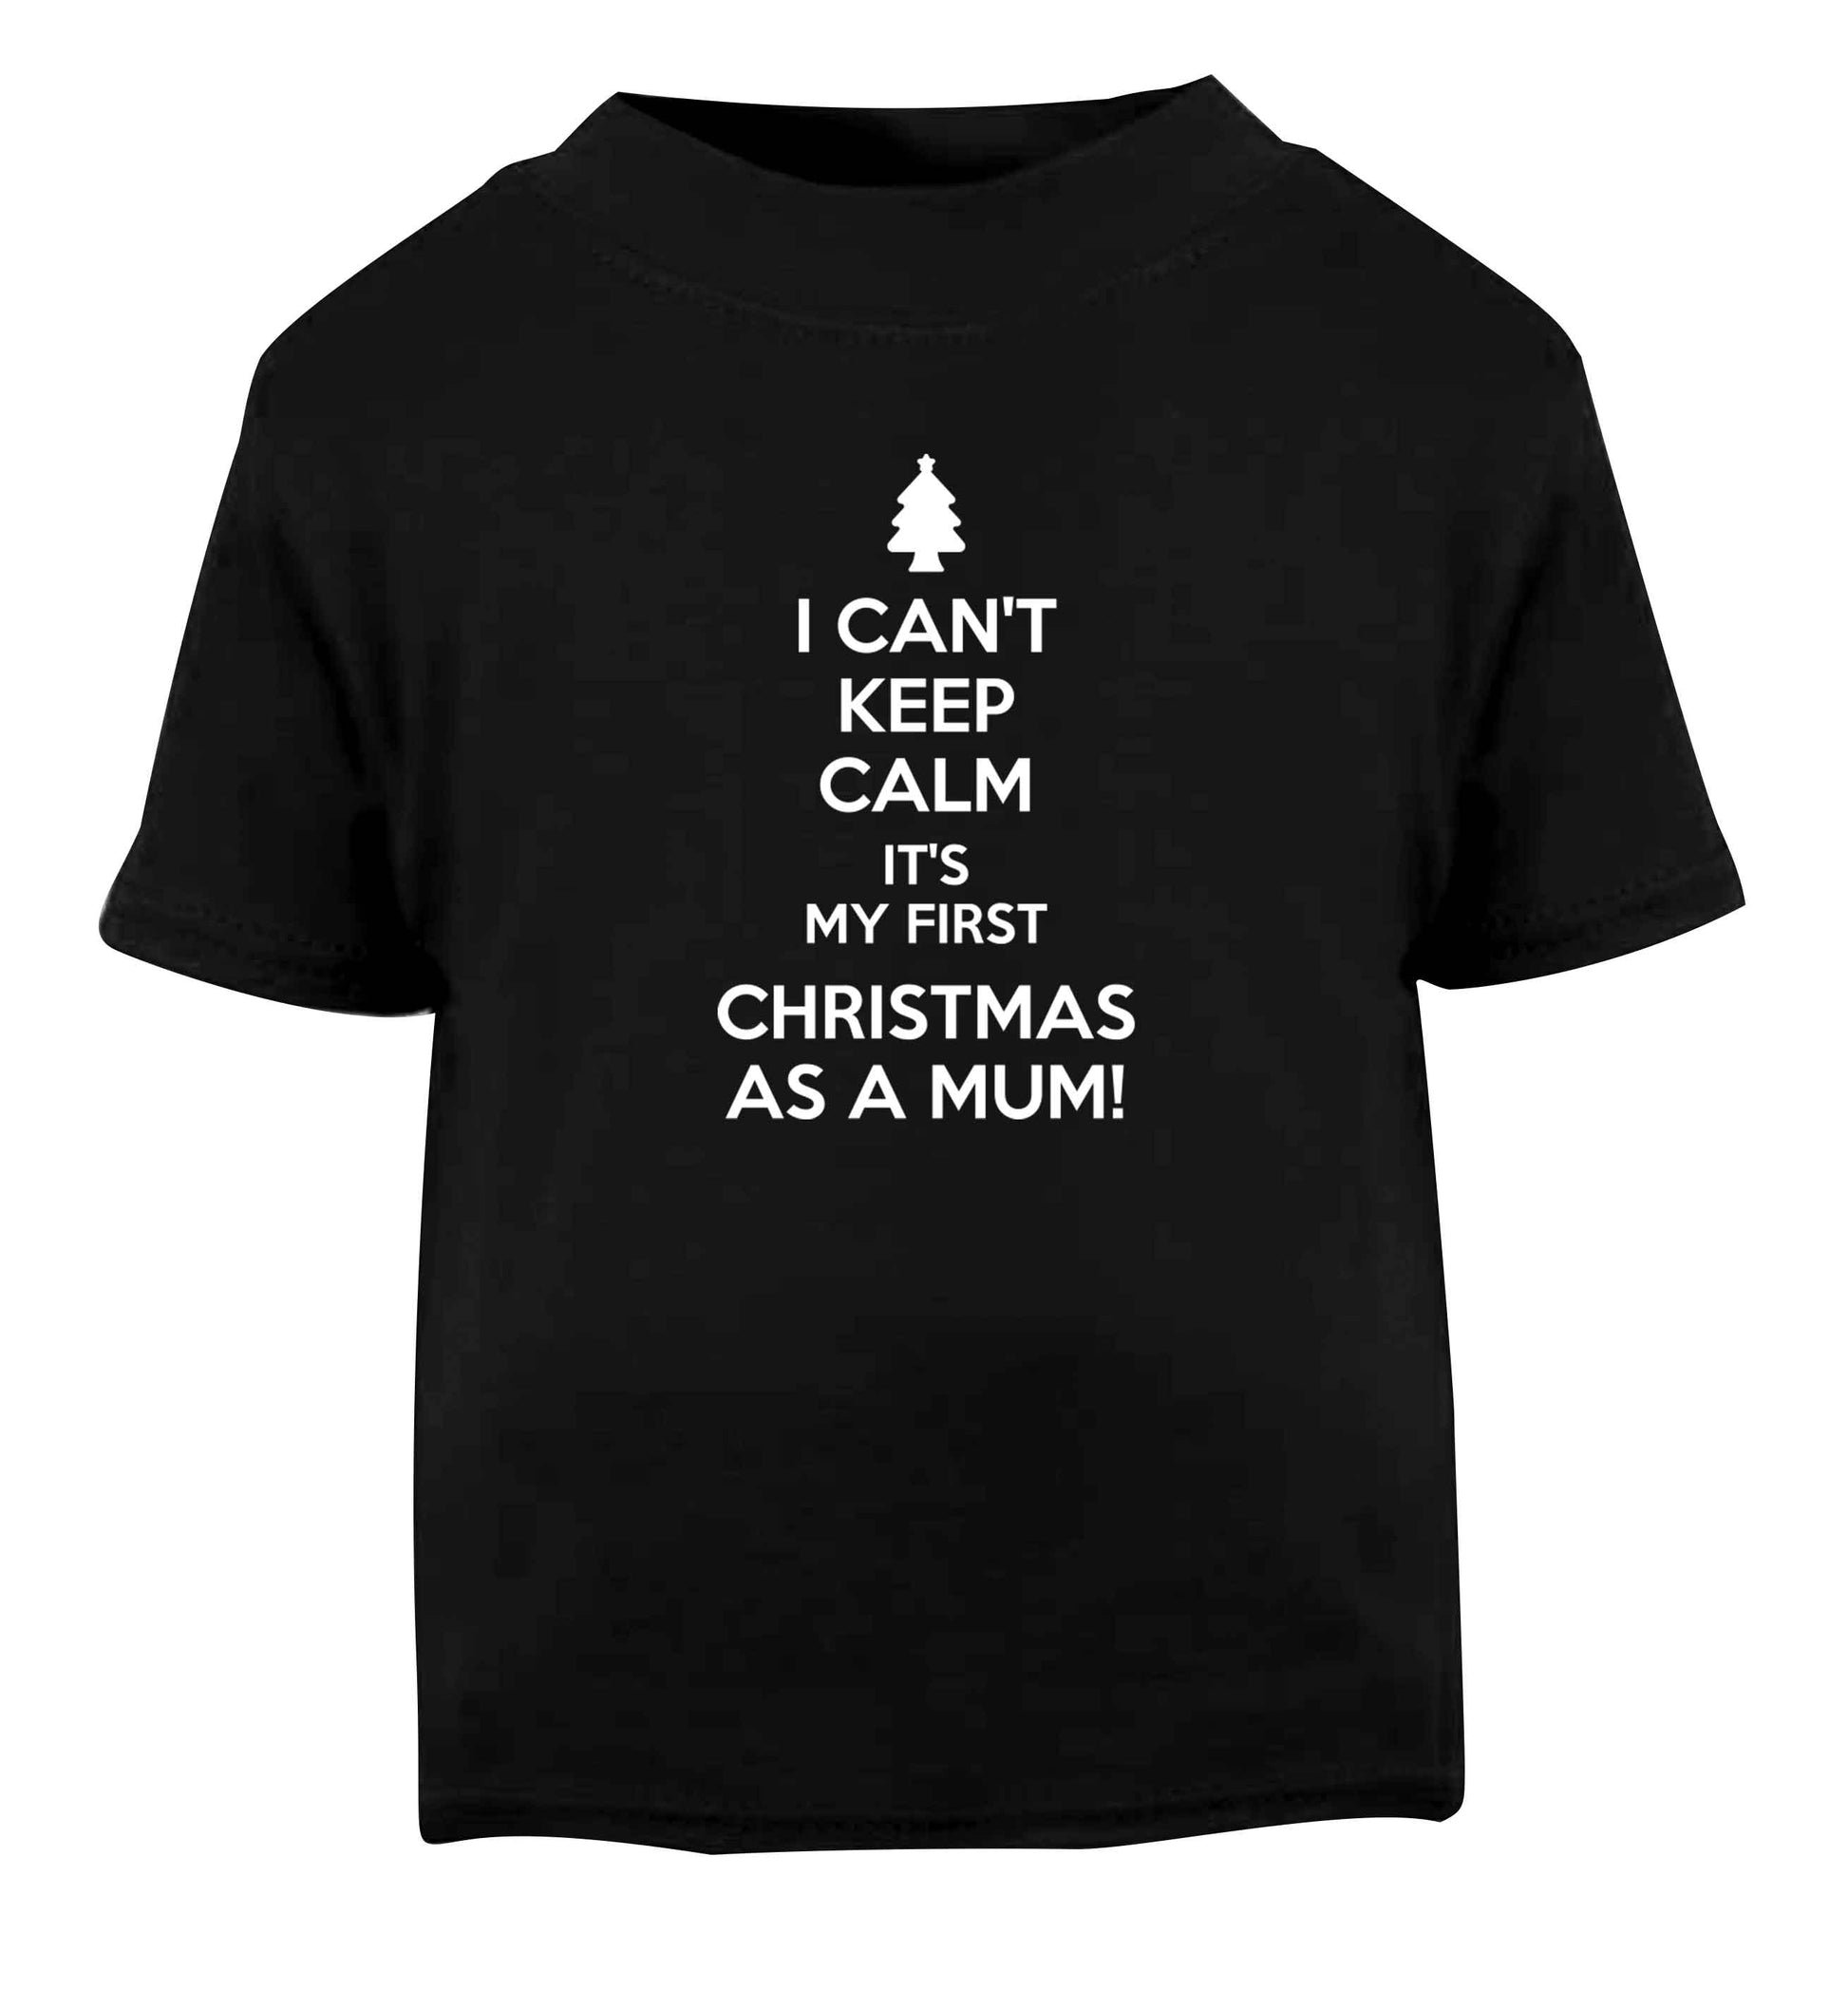 I can't keep calm it's my first Christmas as a mum Black Baby Toddler Tshirt 2 years